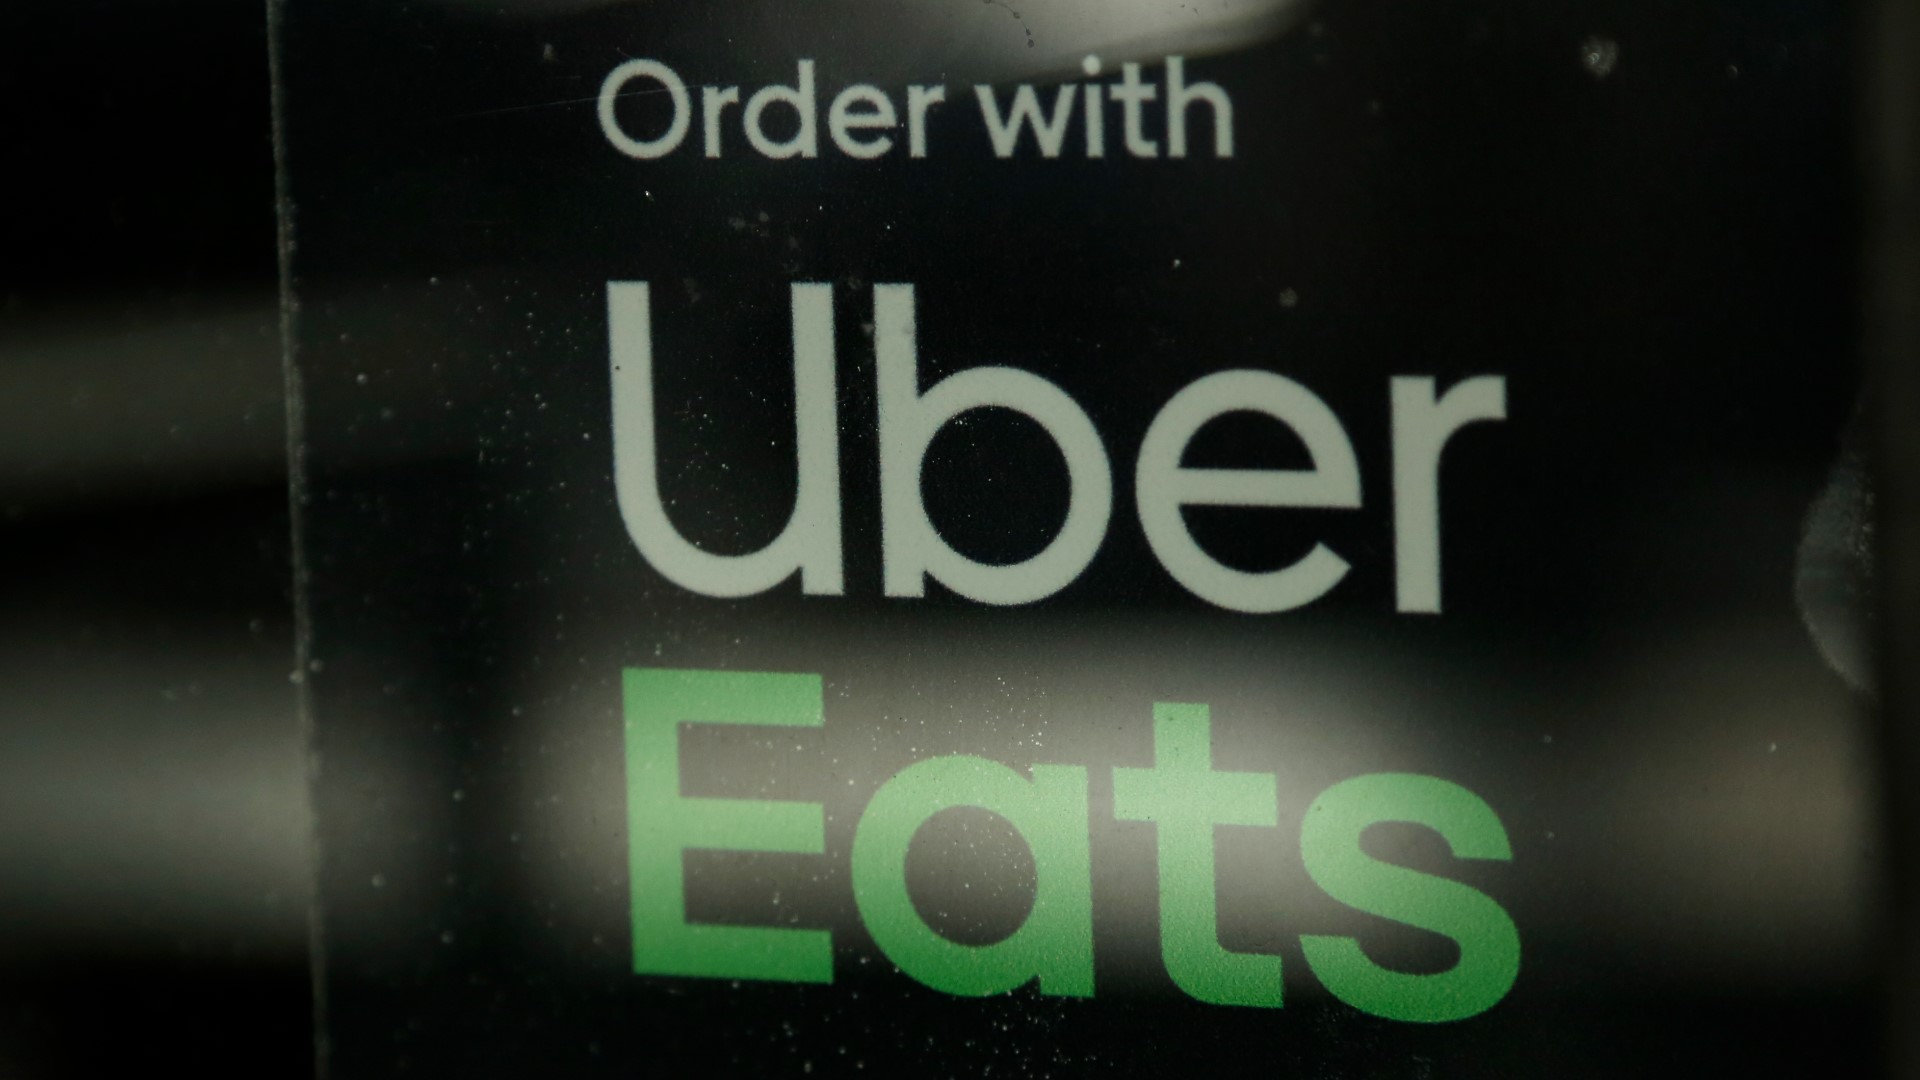 App workers say the bill is long overdue, but companies like Uber and DoorDash claim the proposal would raise delivery costs, leading to fewer jobs for drivers.